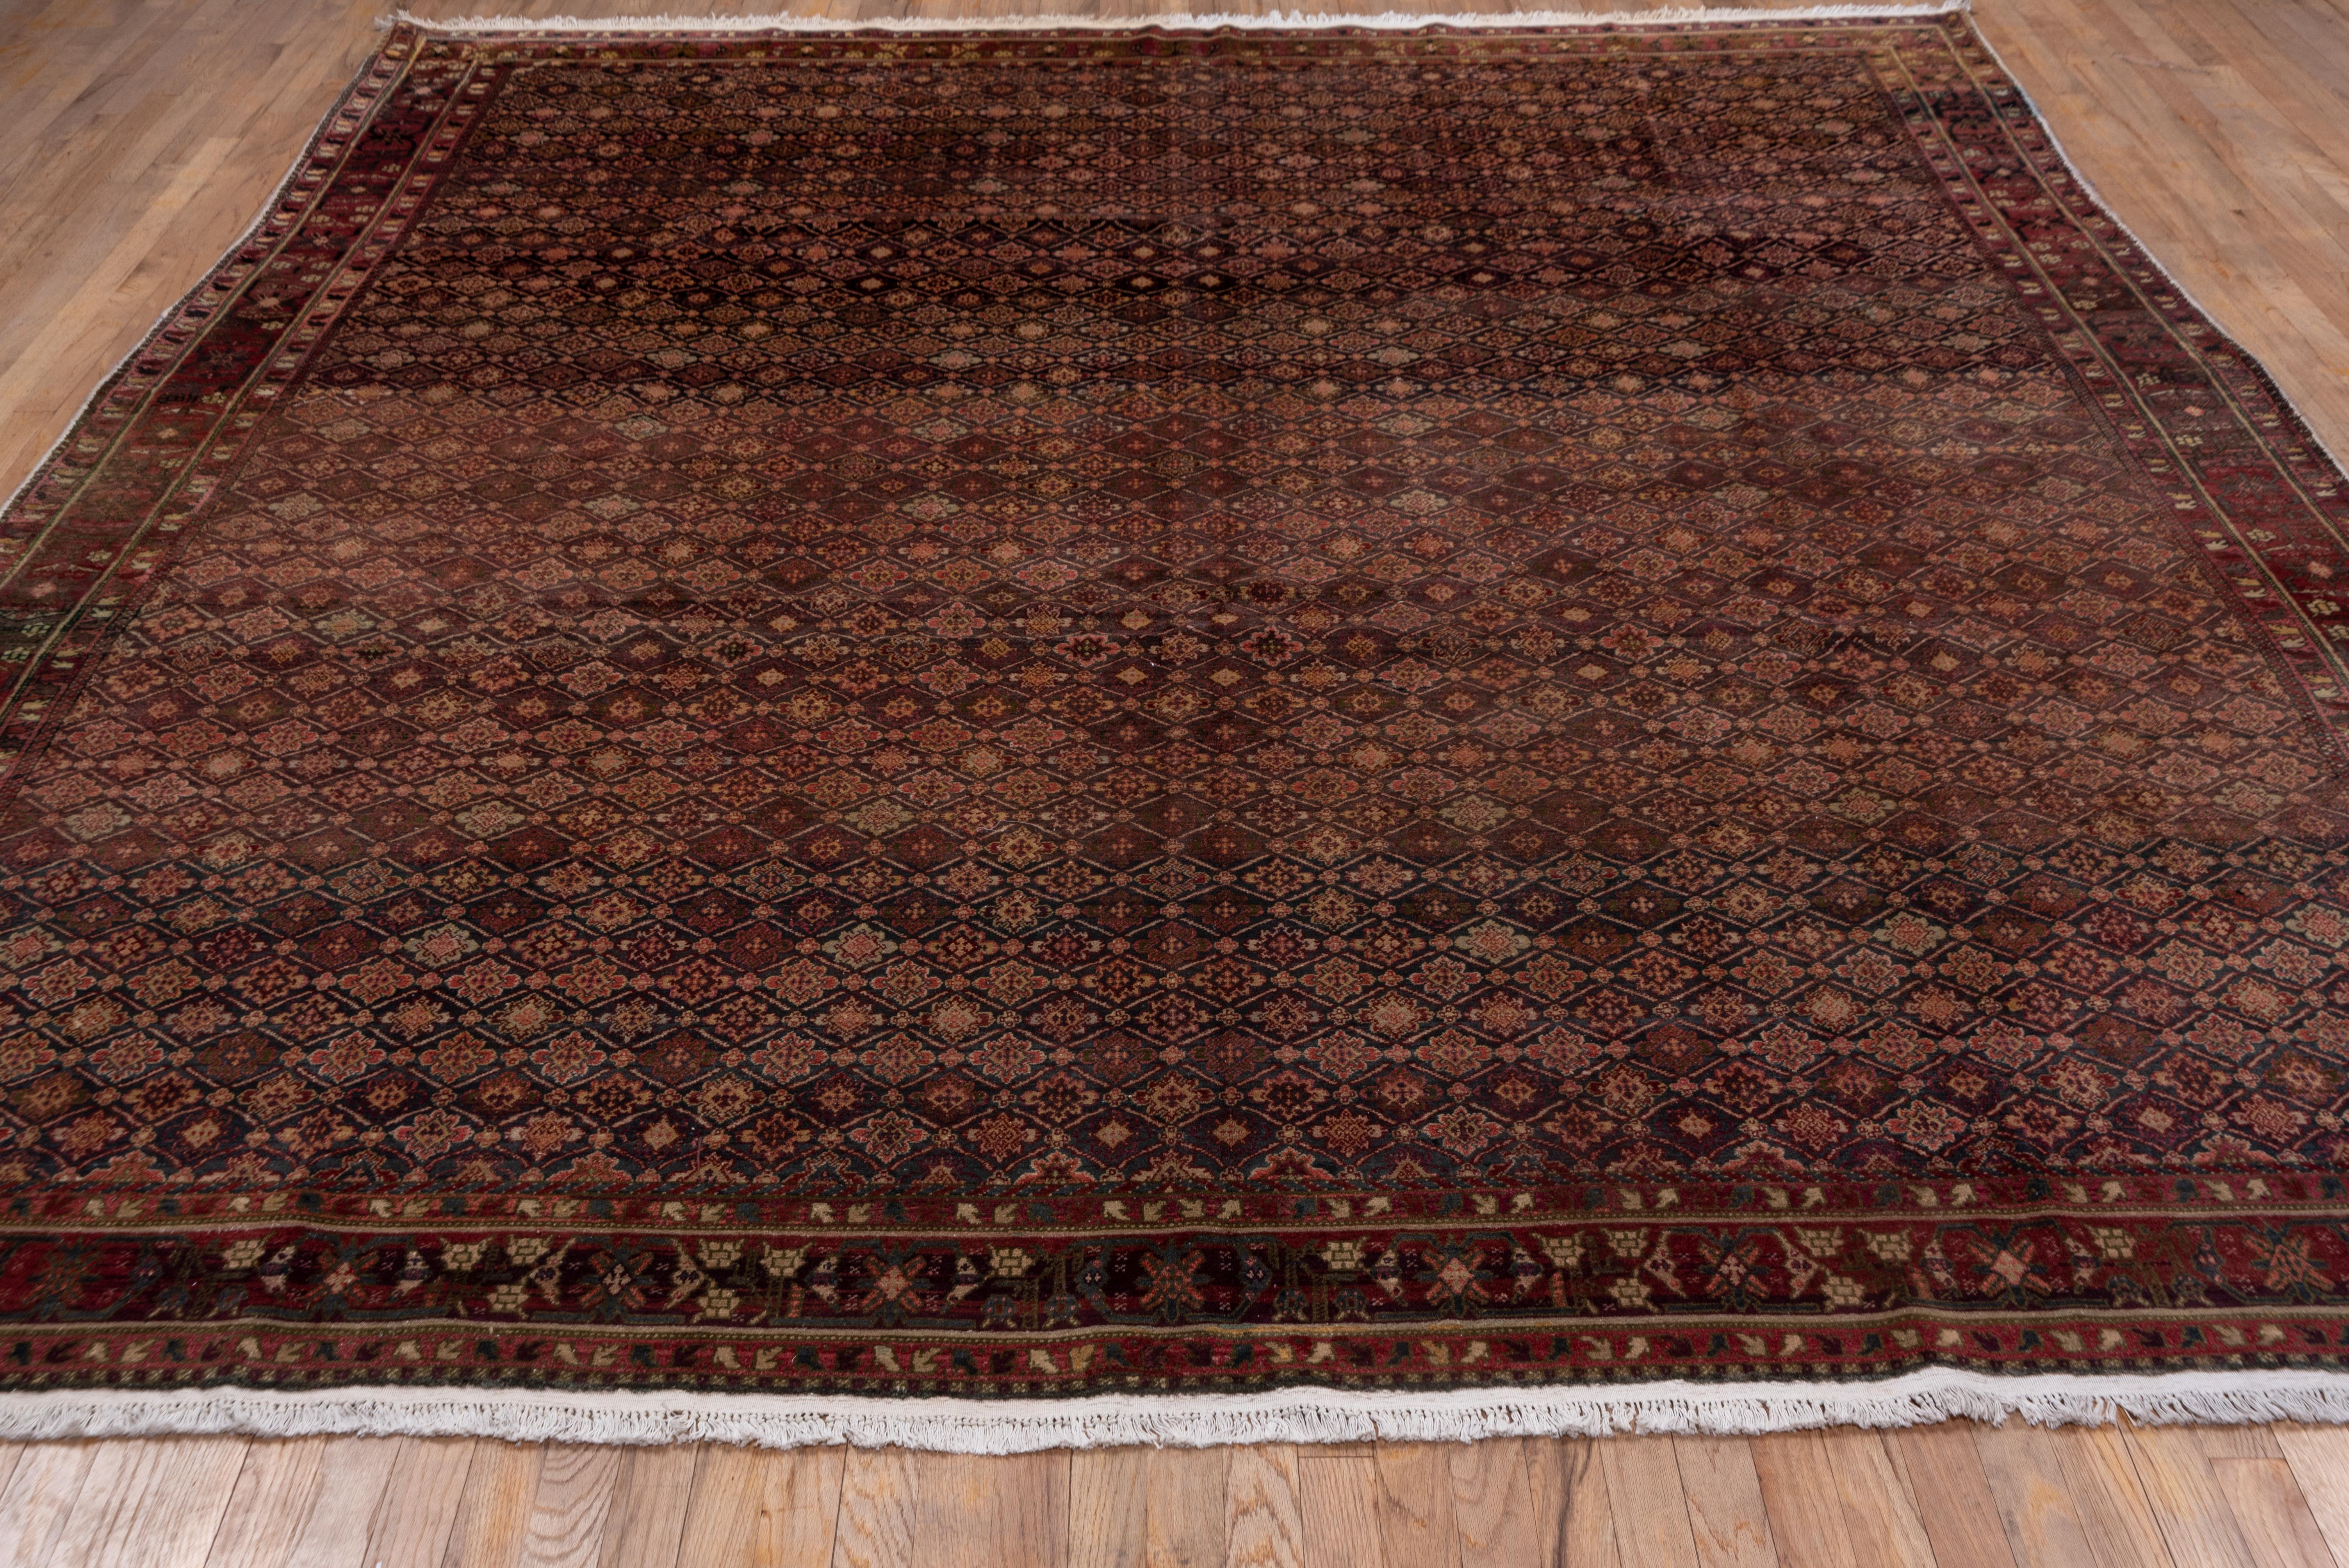 The olive field of this northern Indian, quite finely woven city carpet displays a close Neo-Caucasian lattice design enclosing small octofoil stars. The dark brown border shows a compressed version of the tangerine flower repeat. The tonality is